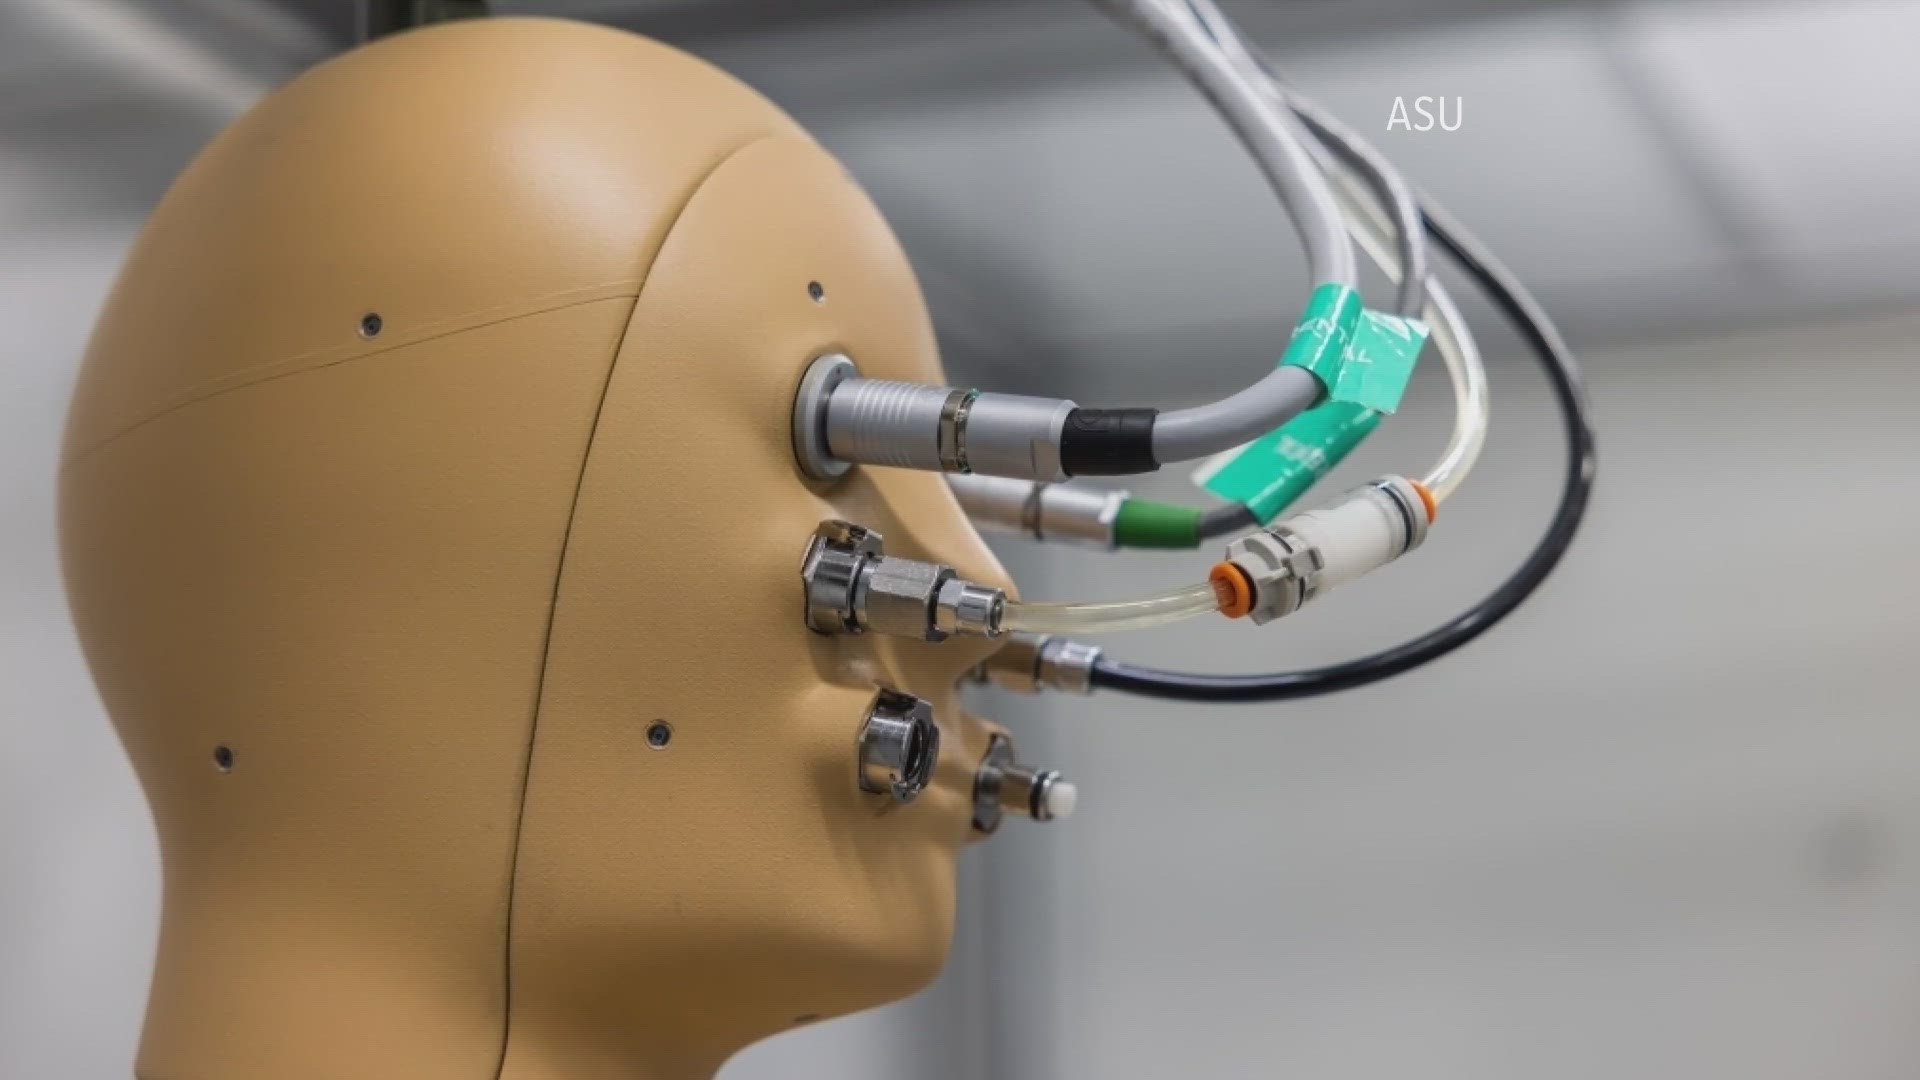 The ASU "manikin" has 140 sweat pores that can provide data on how human bodies experience extreme heat.